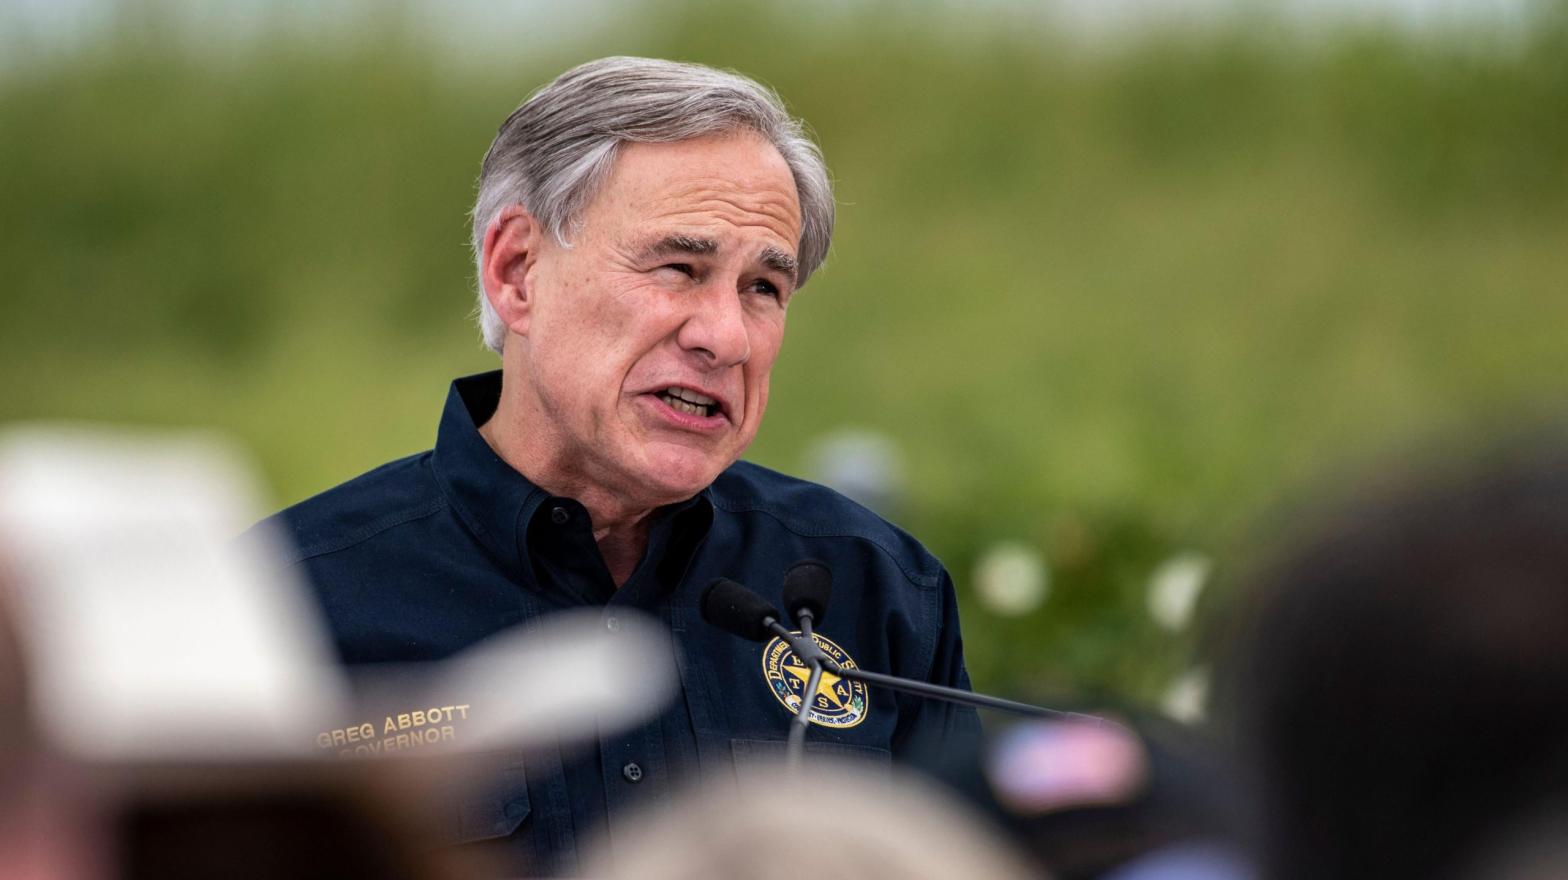 Texas Governor Greg Abbott speaks during a visit to the border wall near Pharr, Texas on June 30, 2021. (Photo: Sergio Flores, Getty Images)